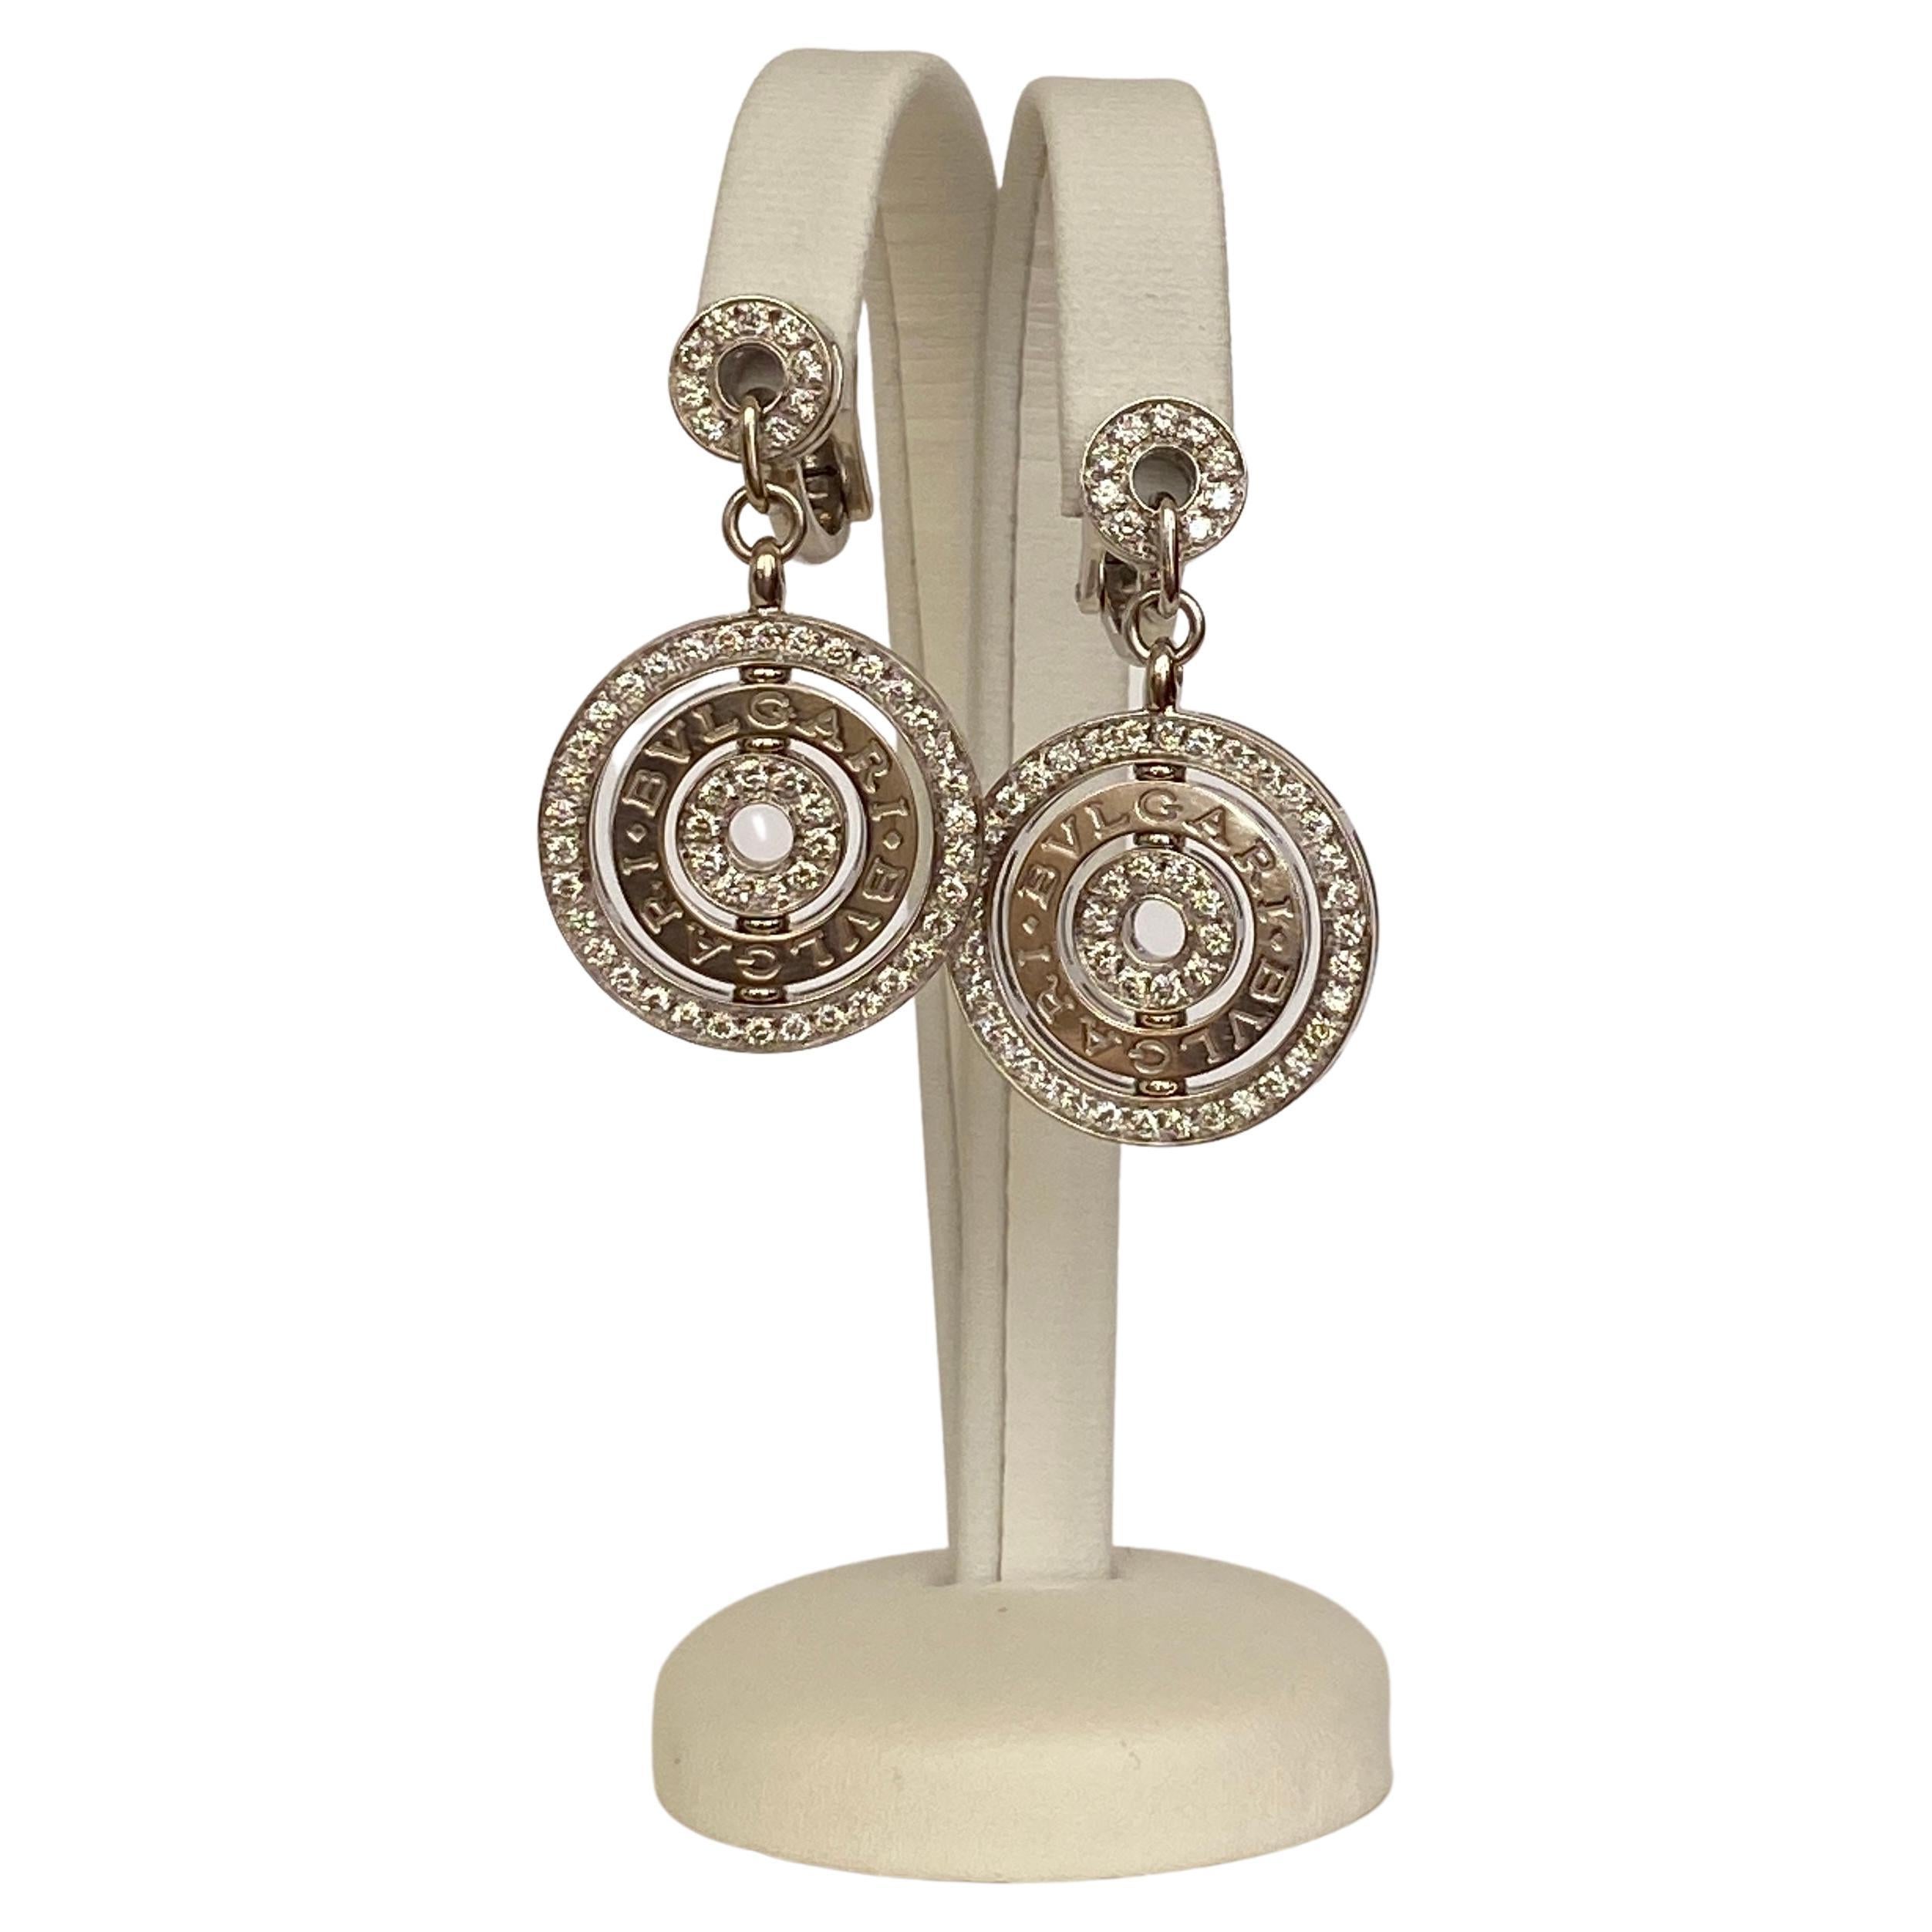 This Bvlgari Bulgari diamond earrings of Italian provenance are crafted in solid 18 kt gold, from the 